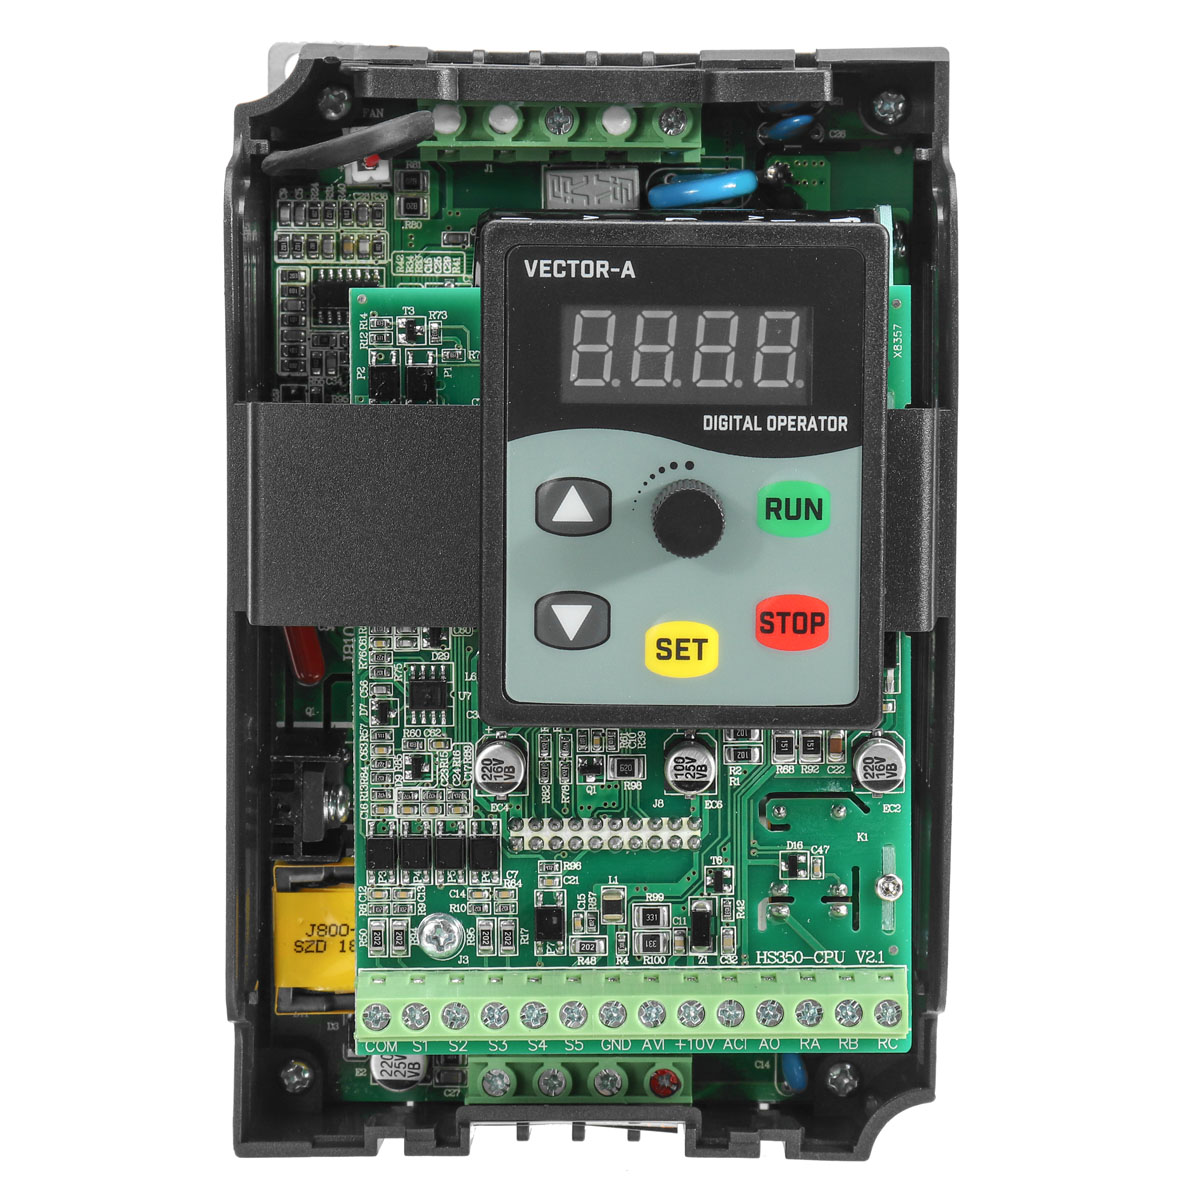 22KW-220V-95A-1HP-To-3-Phase-Variable-Frequency-Inverter-Motor-Drive-VSD-VFD-1392464-5